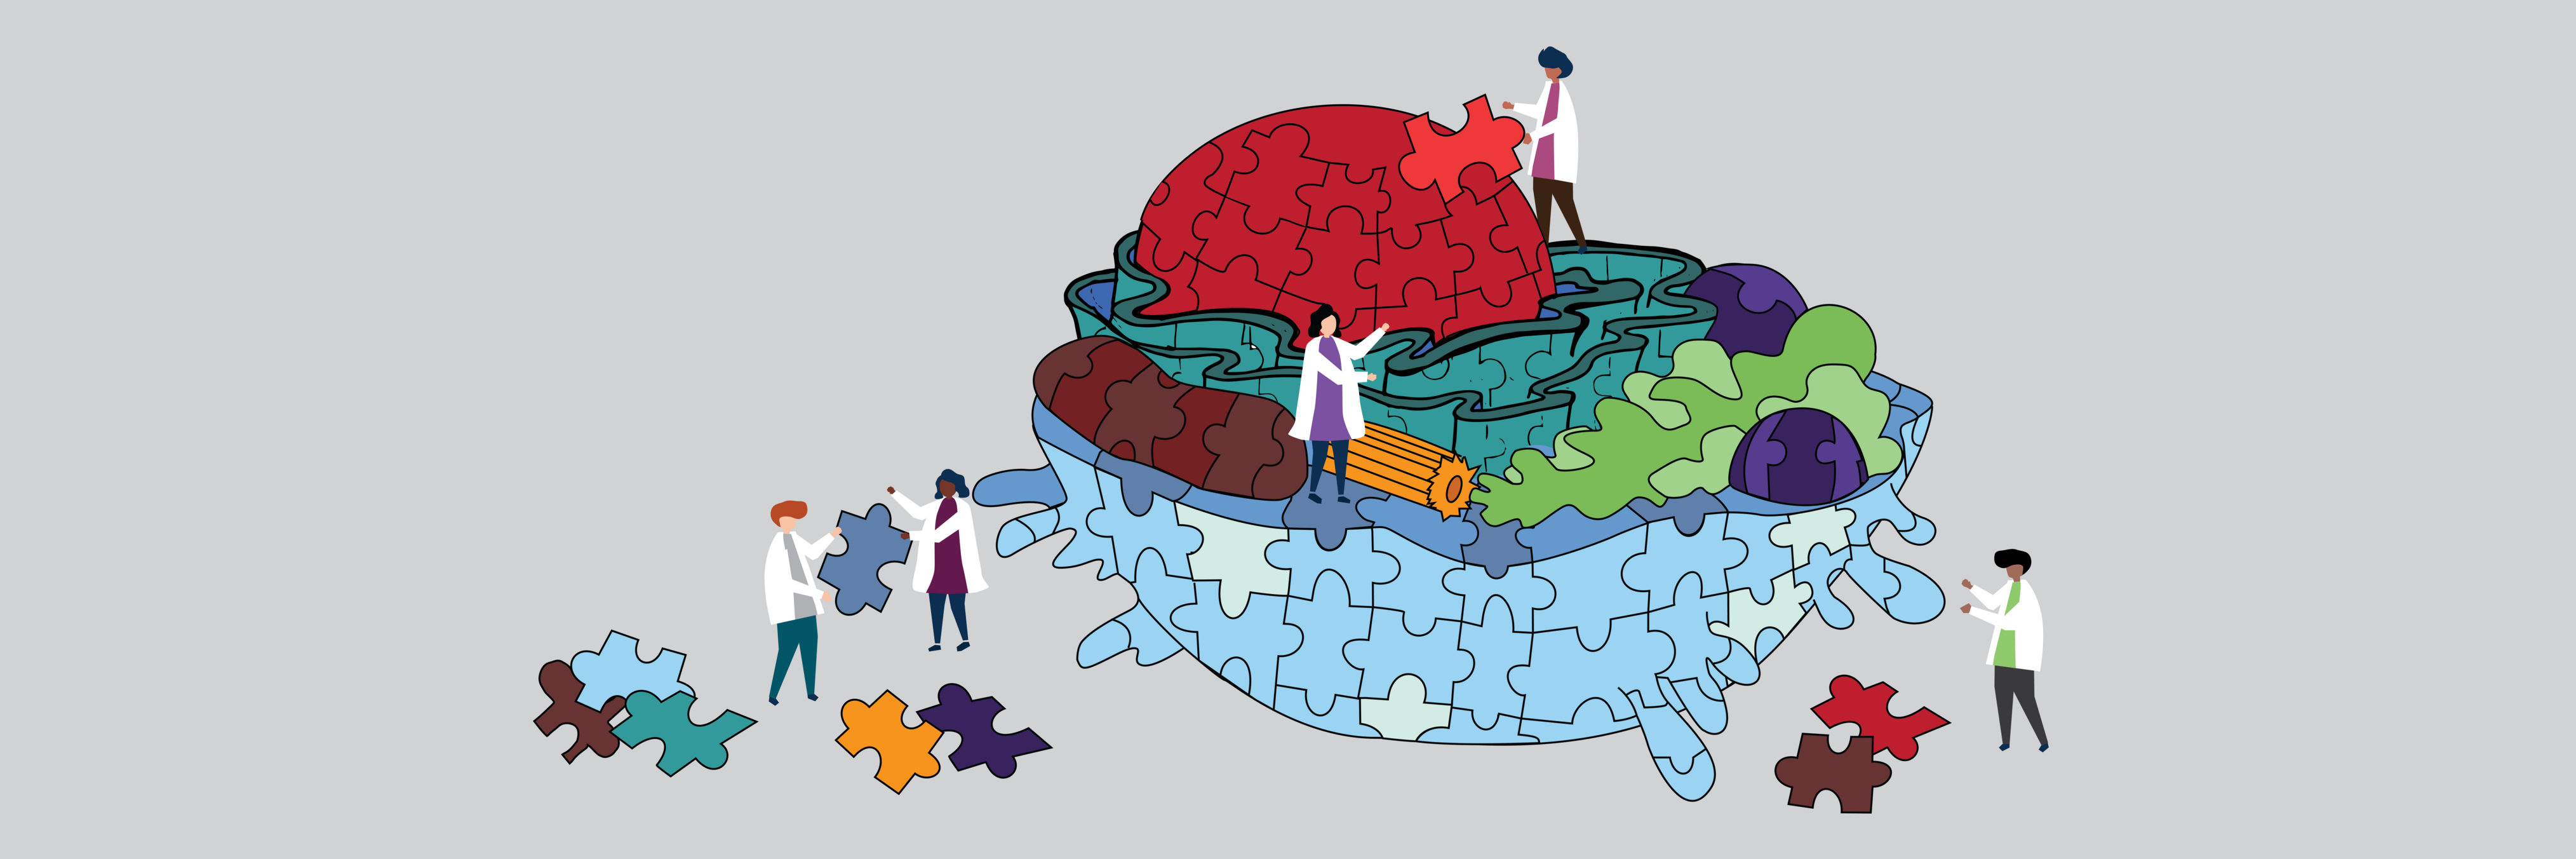 Cartoon of scientists studying a cell as a jigsaw puzzle